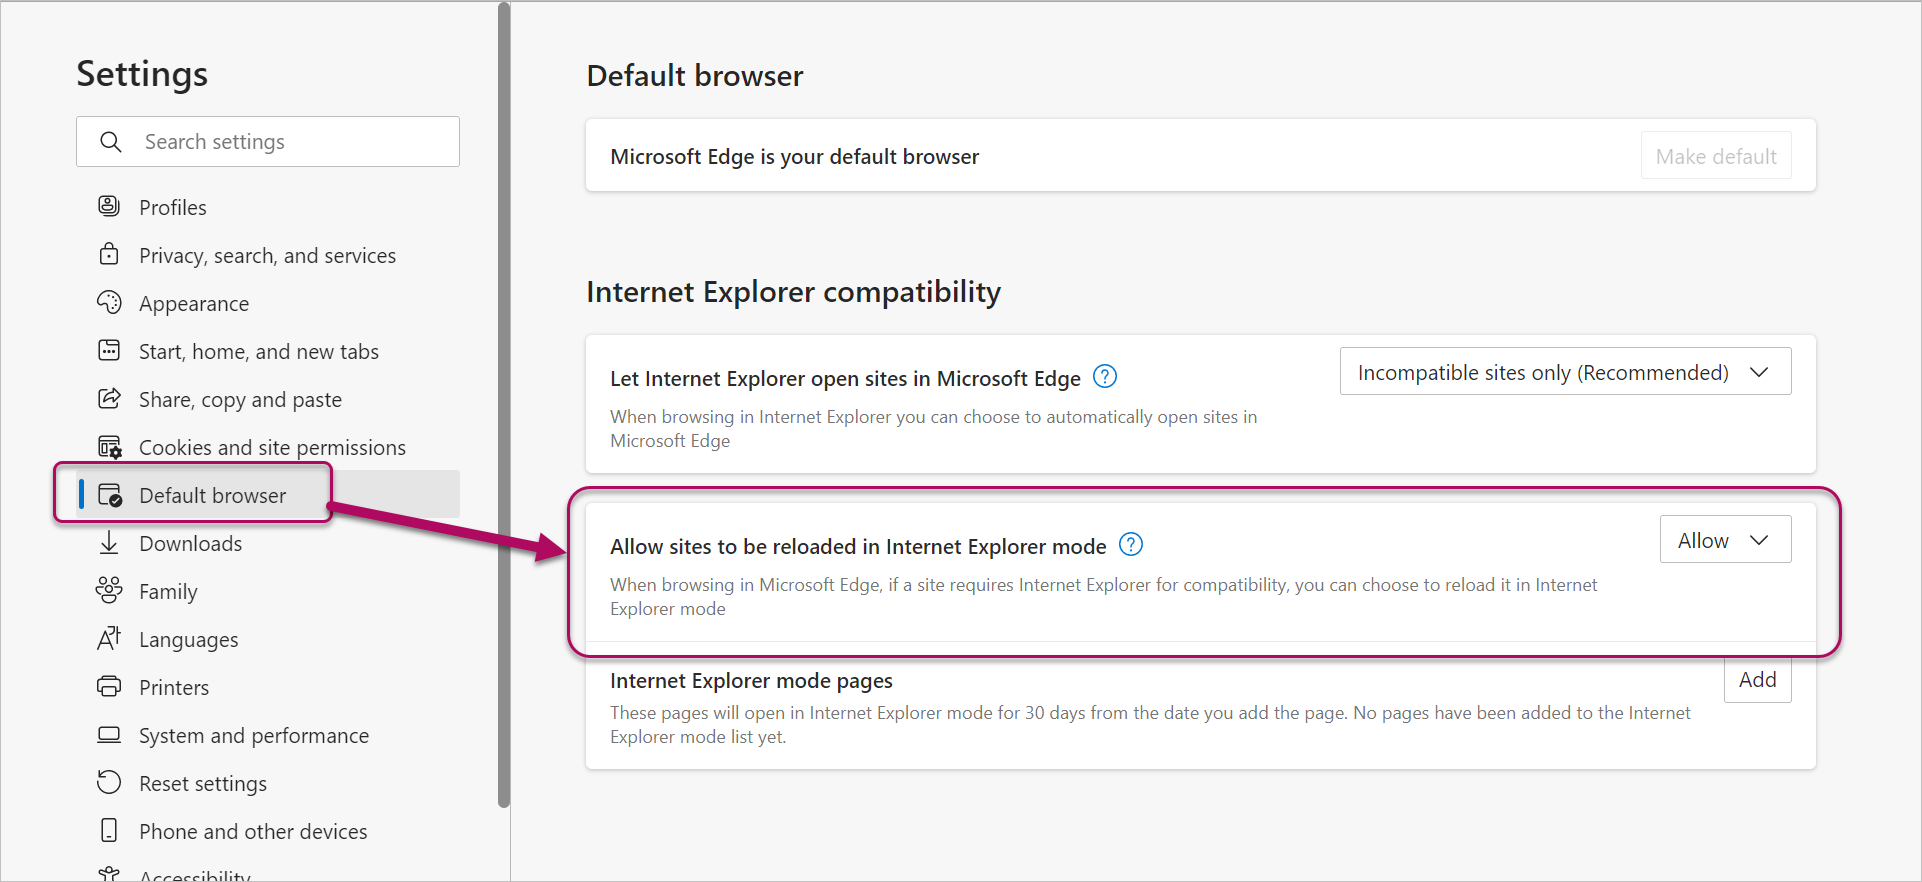 Setting page in Microsoft Edge Browser, Default browser tab, option "Allow sites to be reloaded in Internet Explorer mode" circled. This setting should be set to "Allow". 